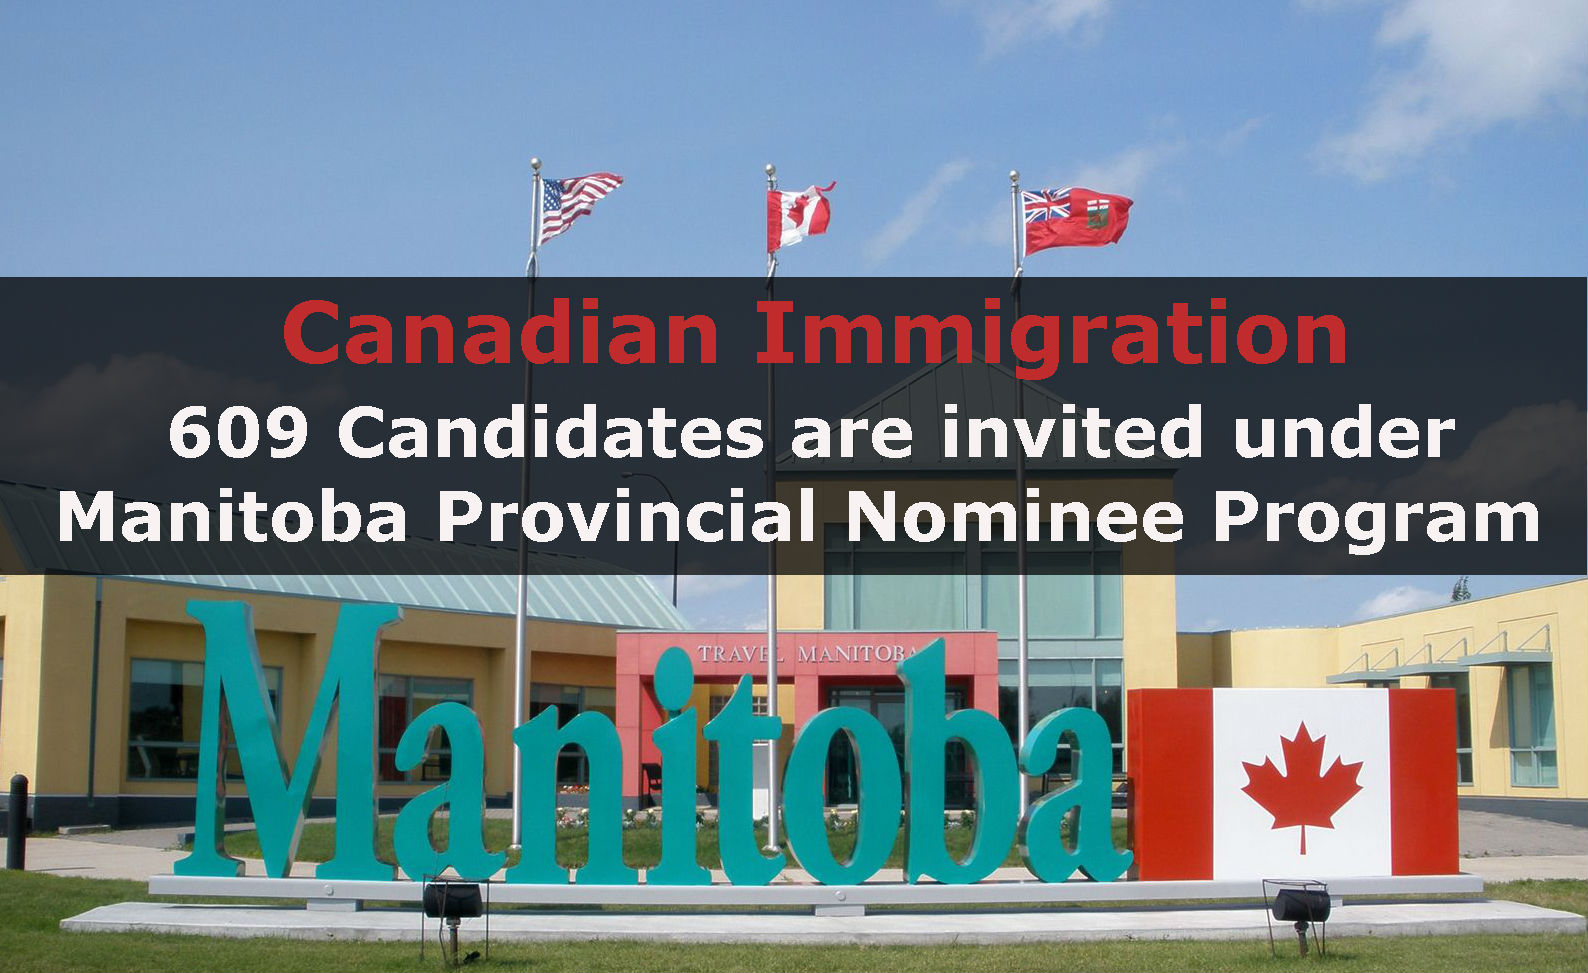 Manitoba Invites 193 Candidates: Improvement In State of the Immigration